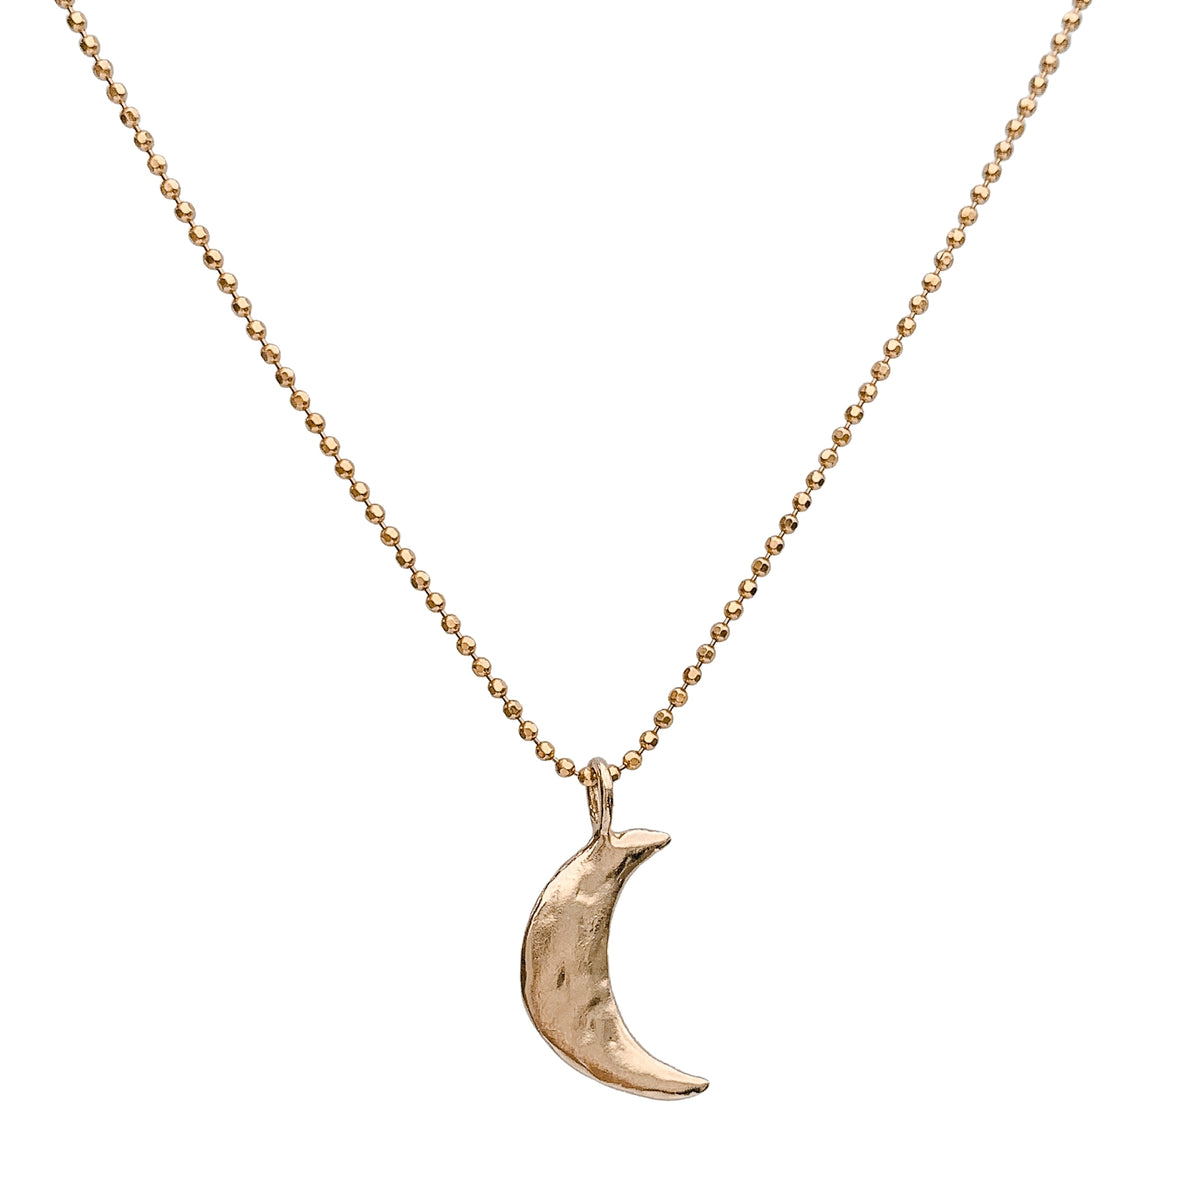 Buy Solid Gold Crescent Moon Pendant Necklace, 14k Gold Minimalist  Celestial Necklace for Women, Lunar Necklace, Moon Phase Necklace for Her  Online in India - Etsy